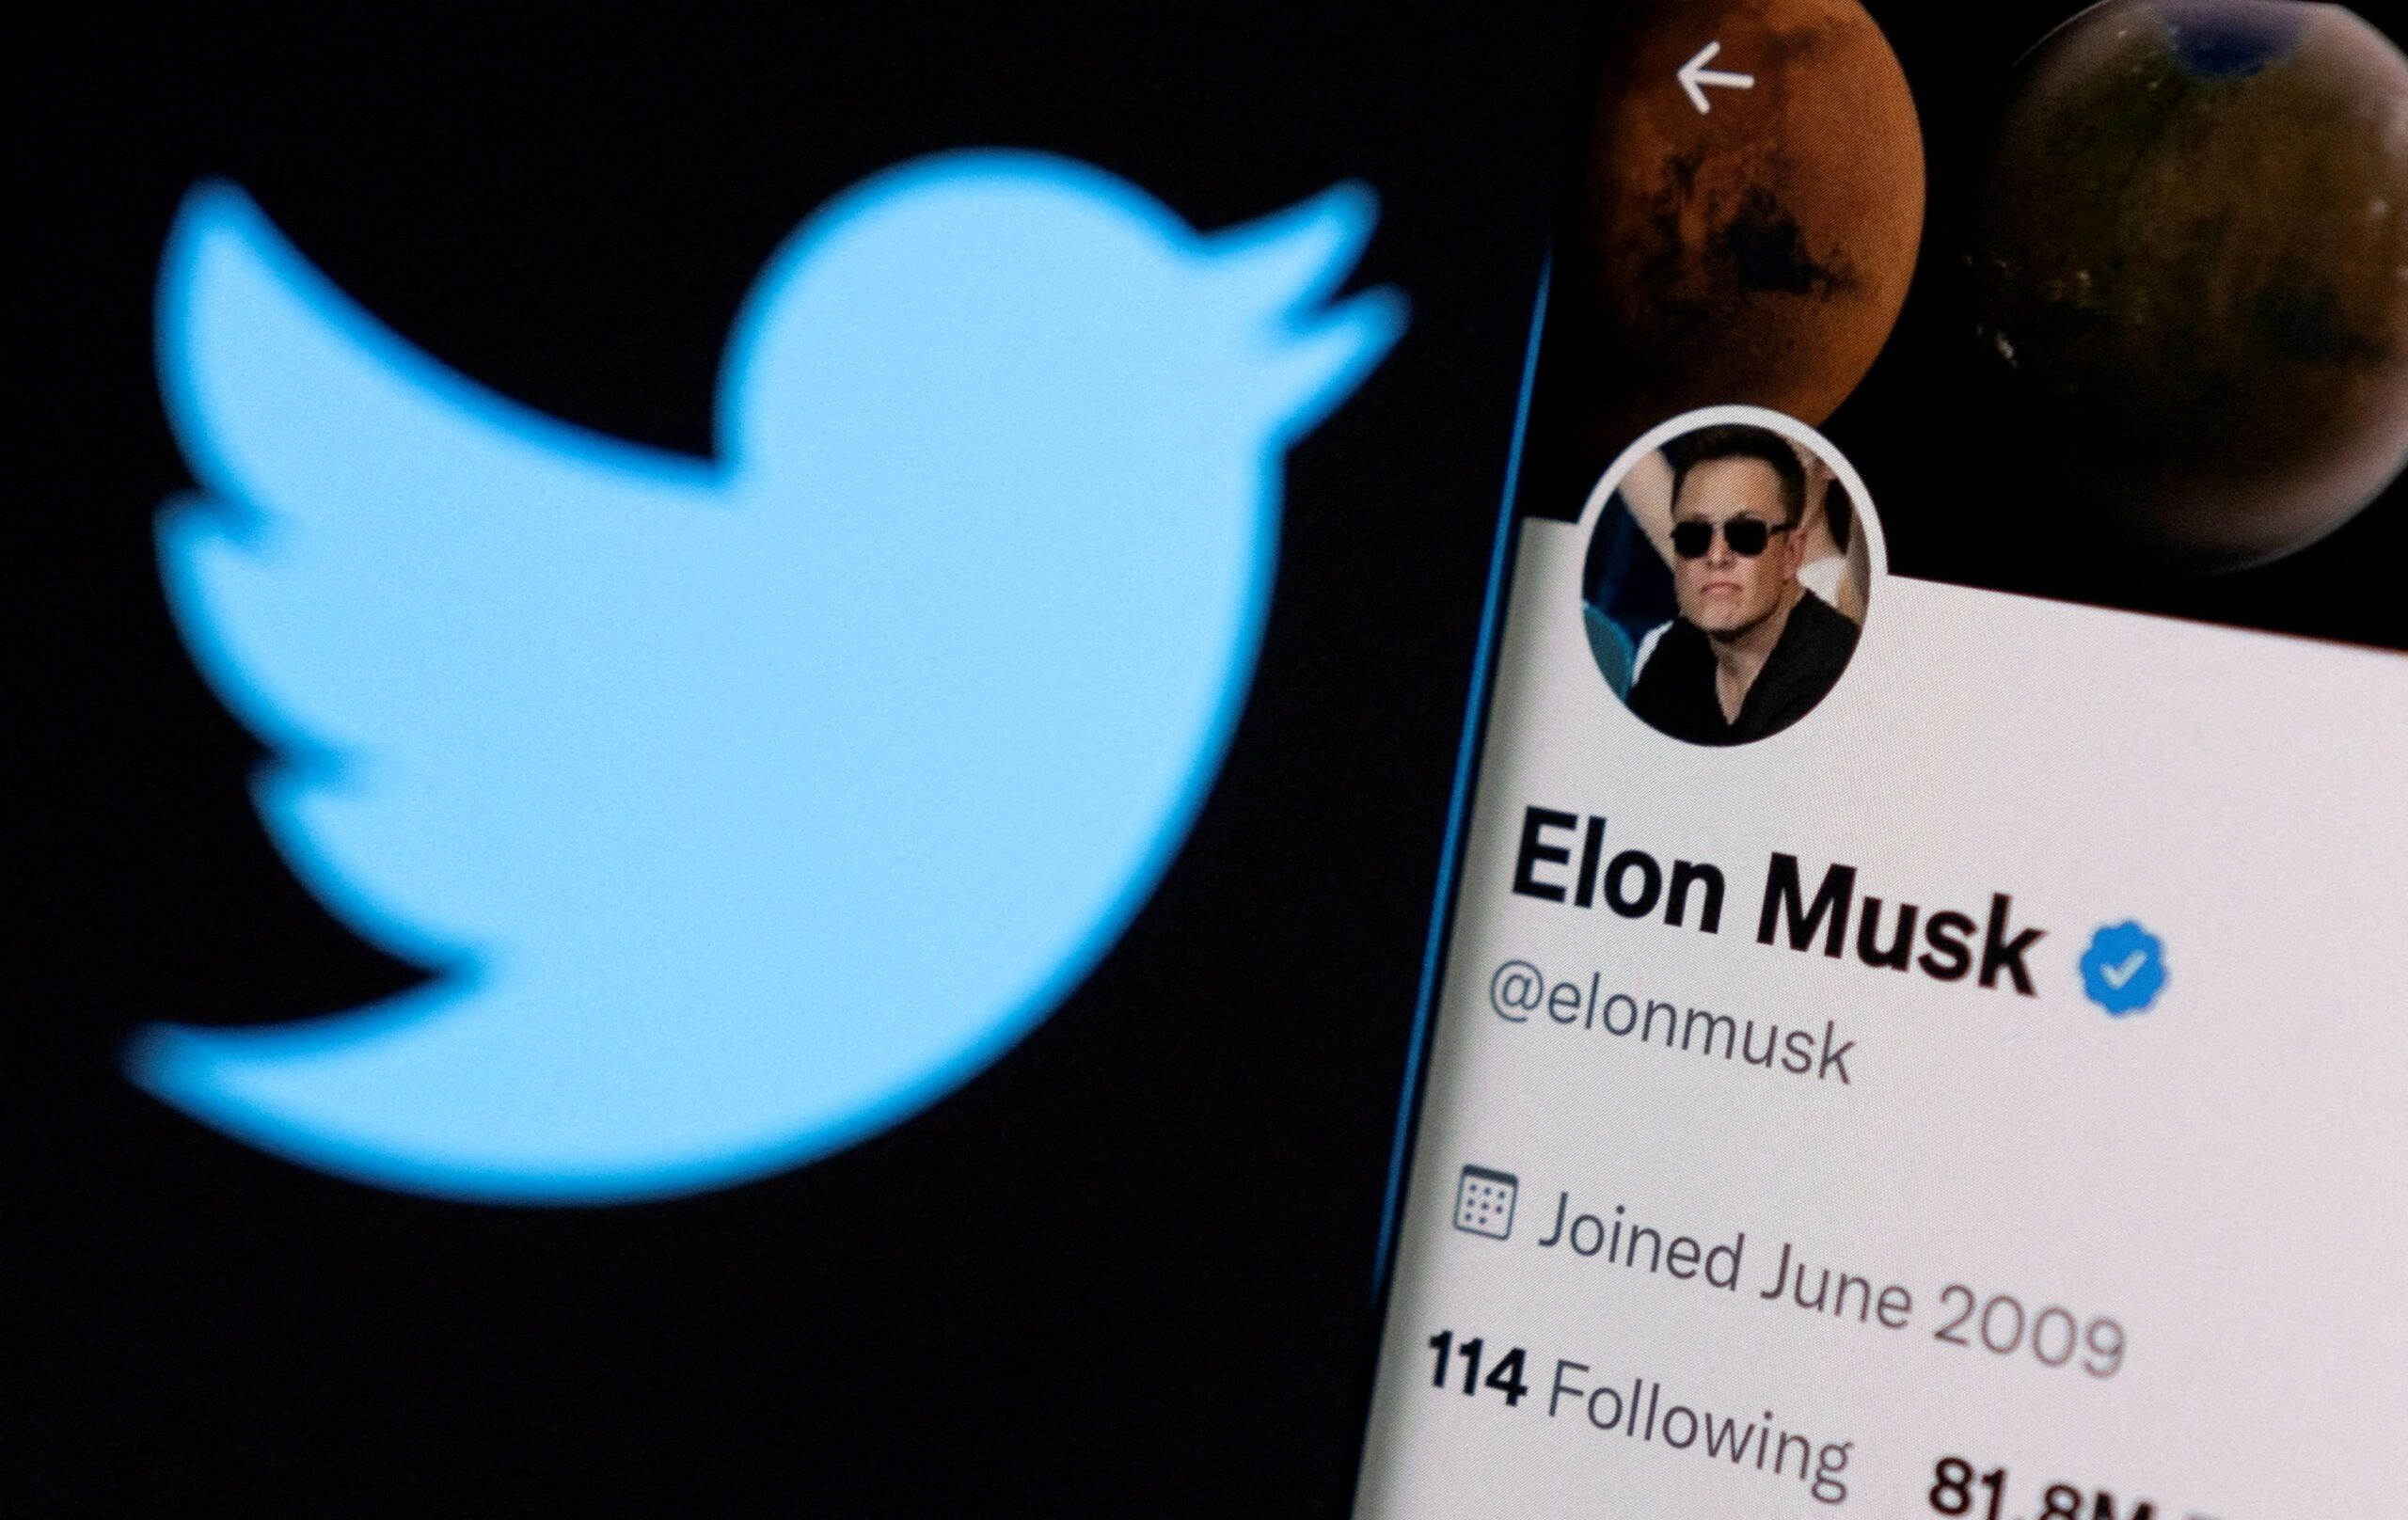 In call with Twitter staff, Elon Musk muses on space aliens, company’s future